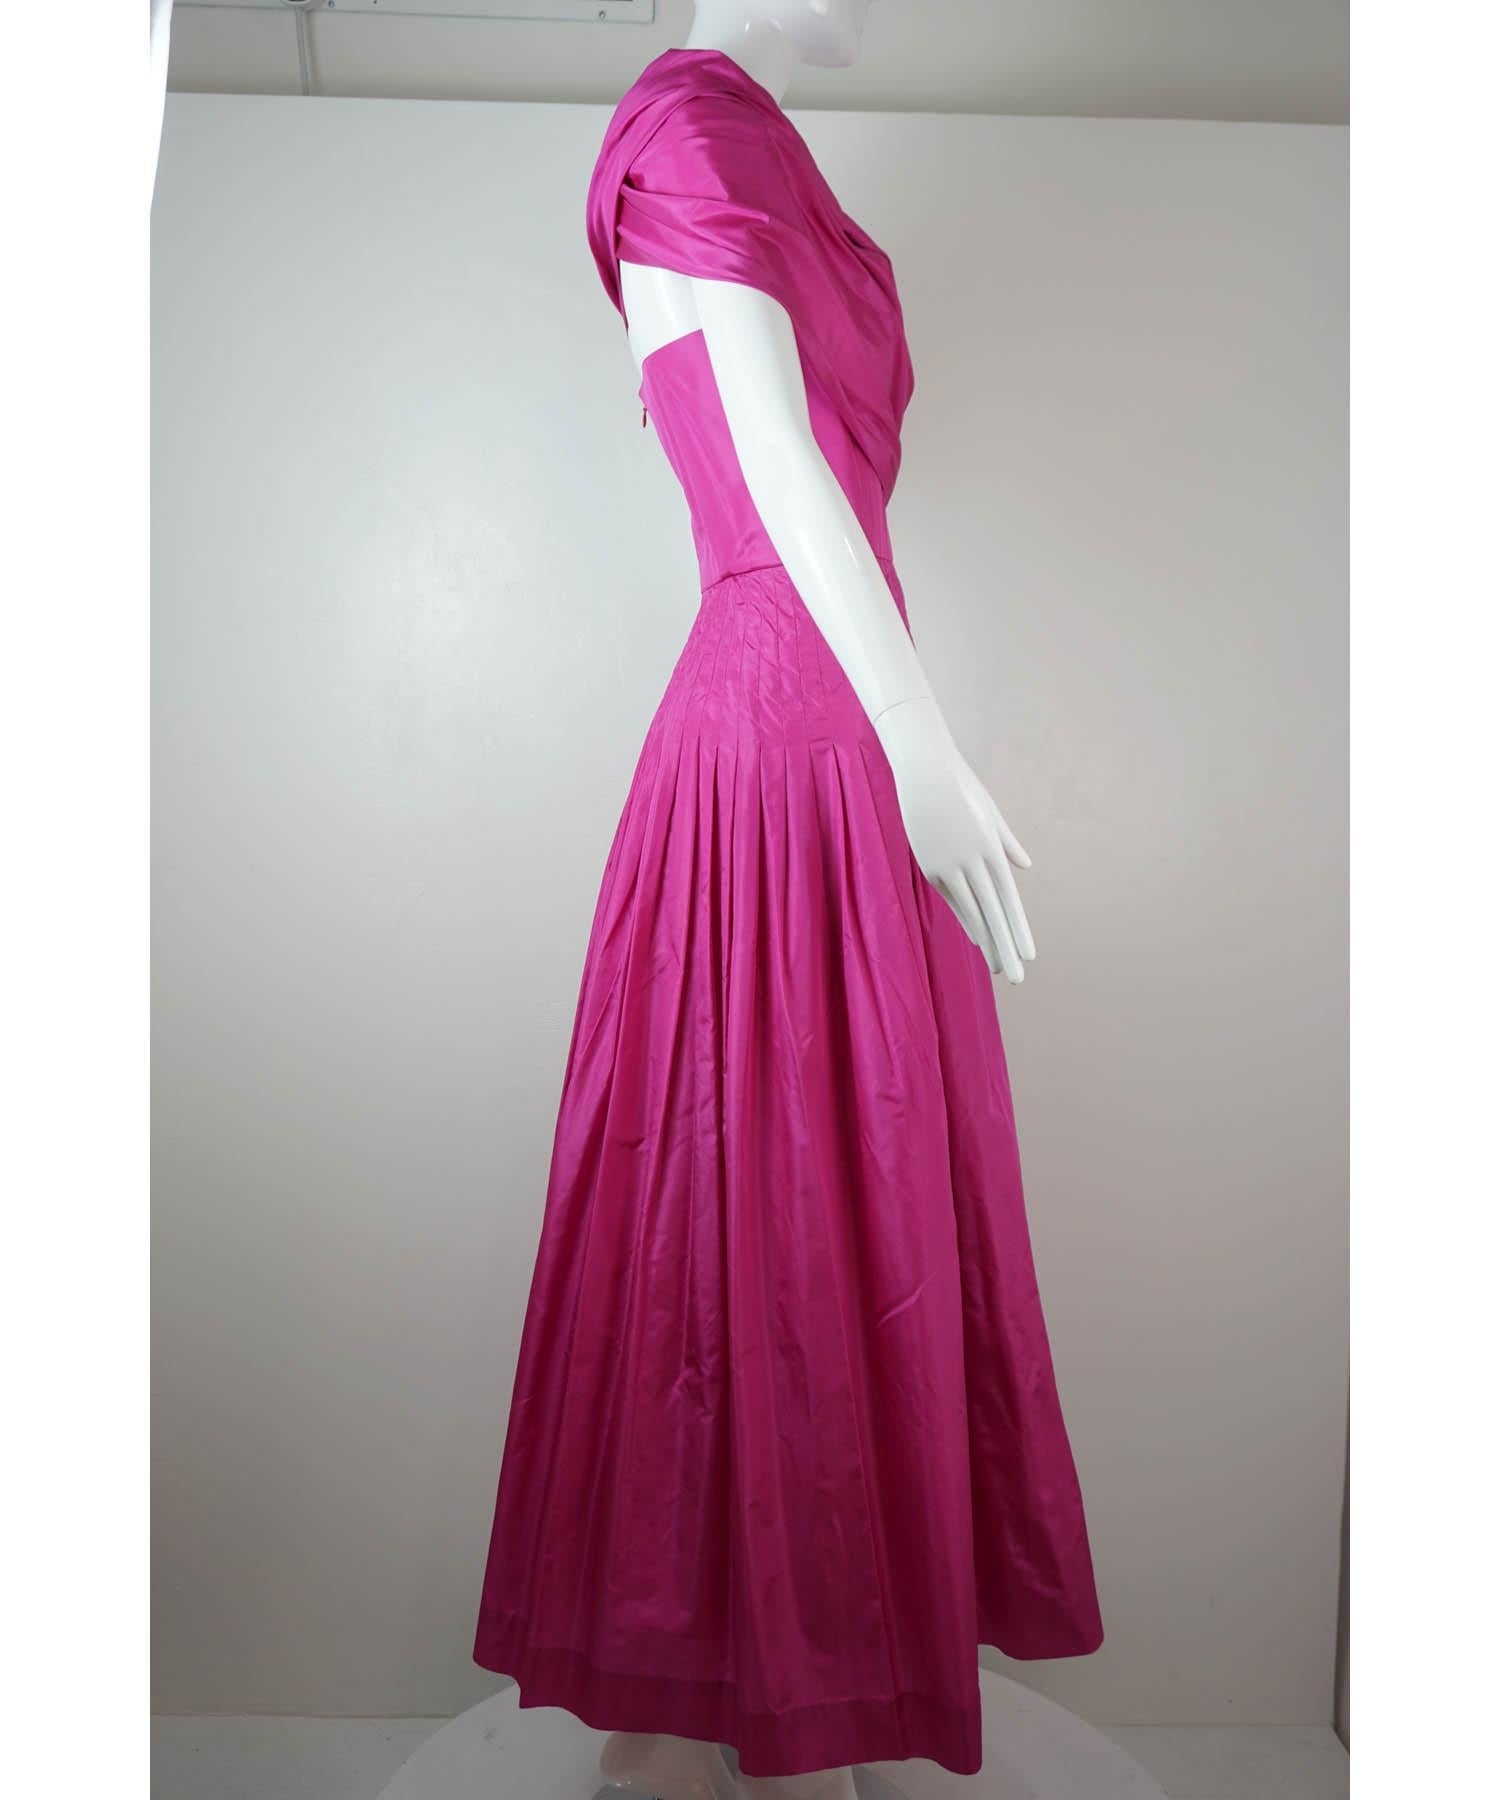 Bill Blass Hot Pink Silk Gown In Excellent Condition For Sale In Carmel, CA